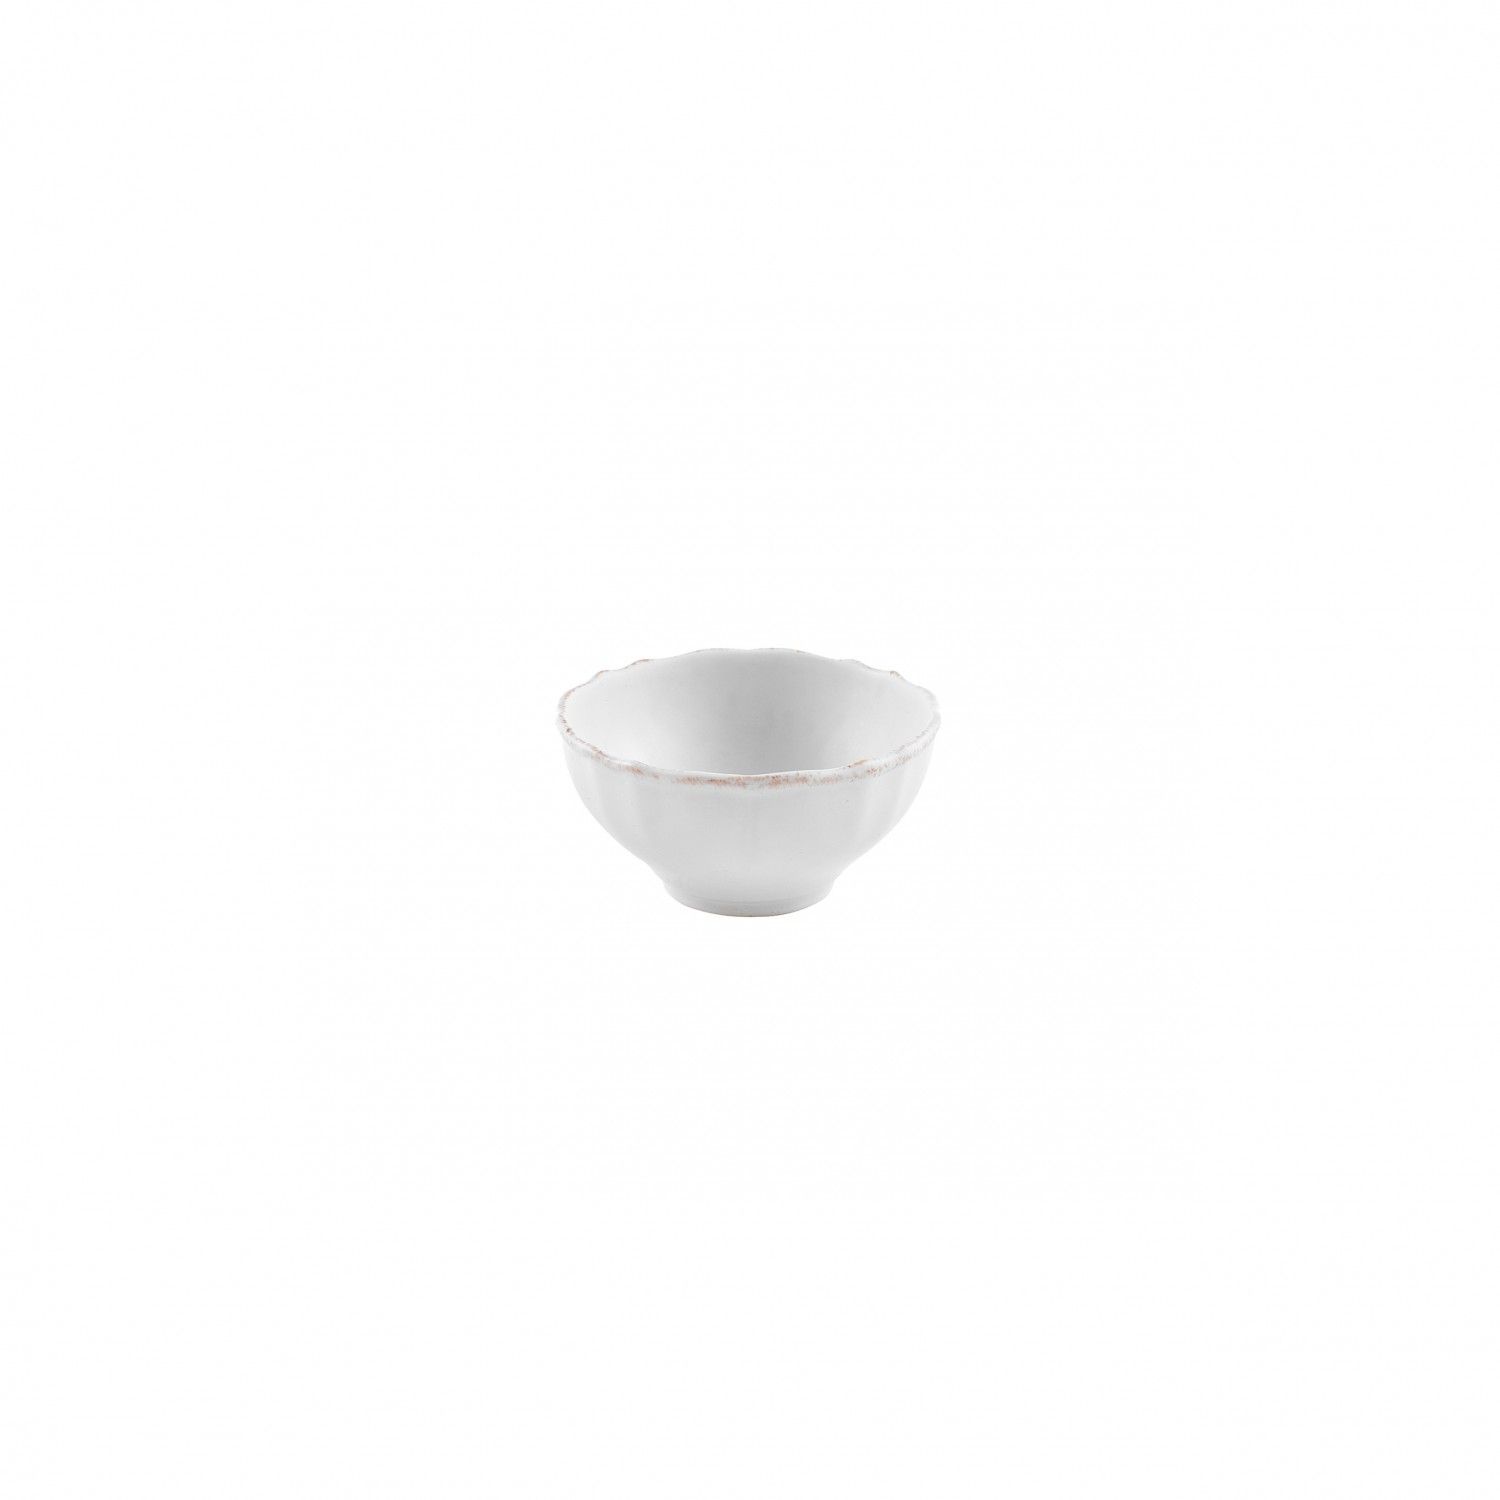 Impressions White Fruit/soup/cereal Bowl 13cm Gift